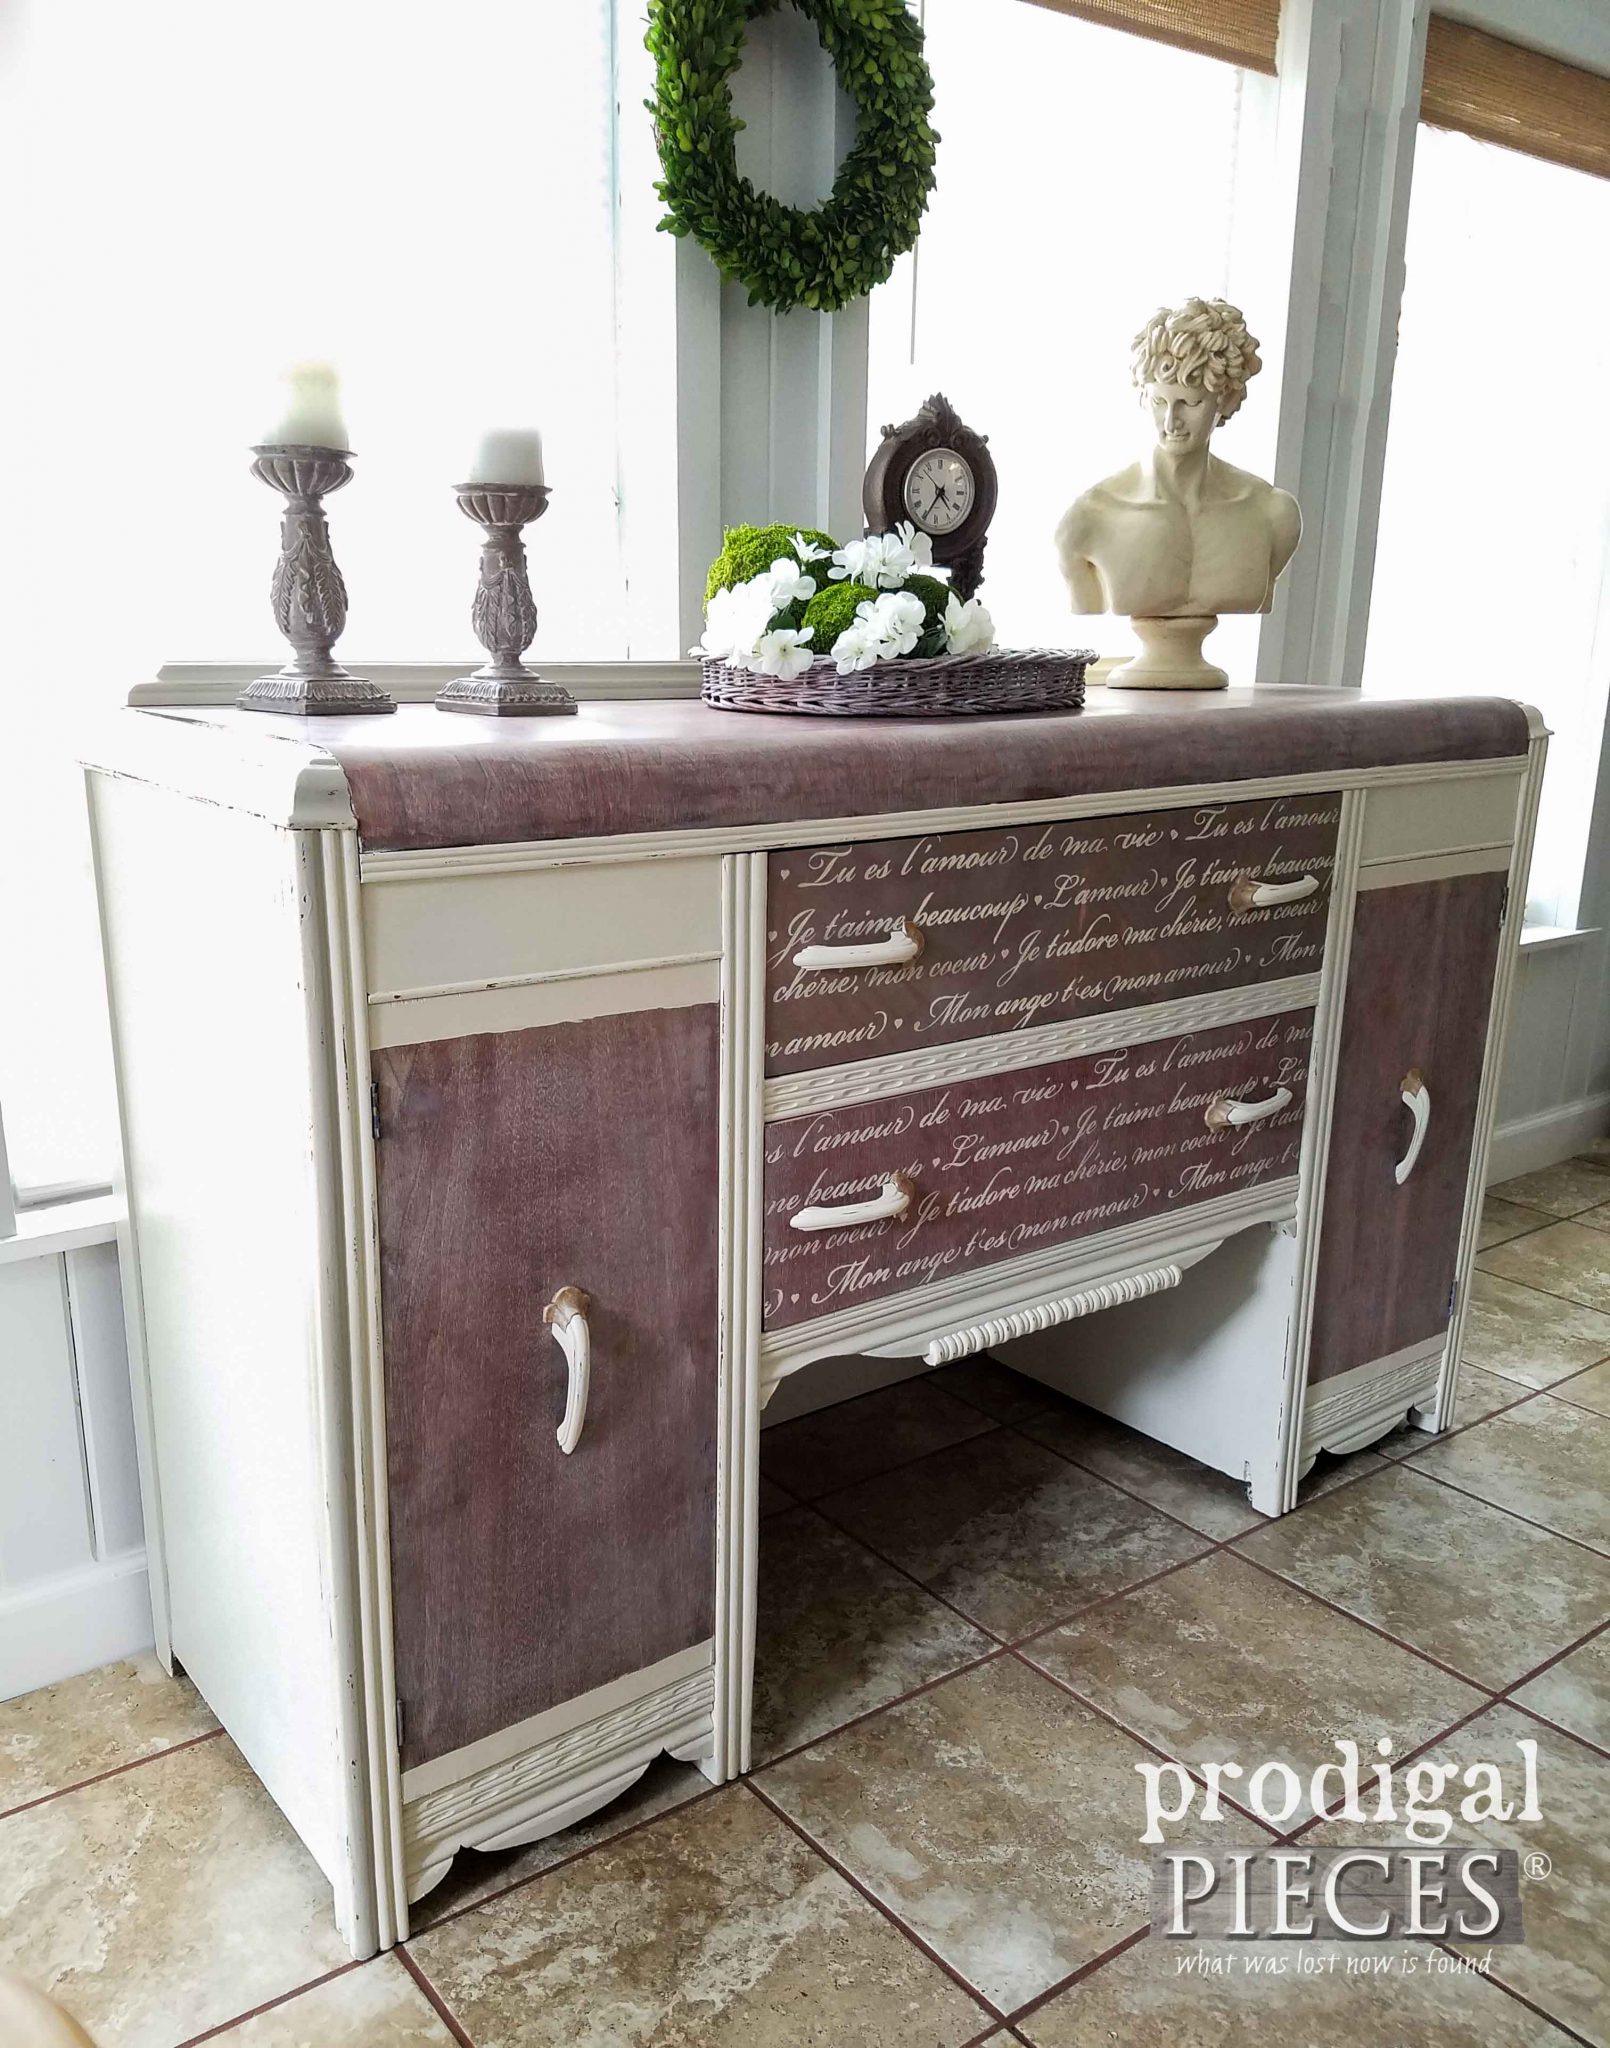 Antique Art Deco Waterfall Buffet Available at Prodigal Pieces | prodigalpieces.com